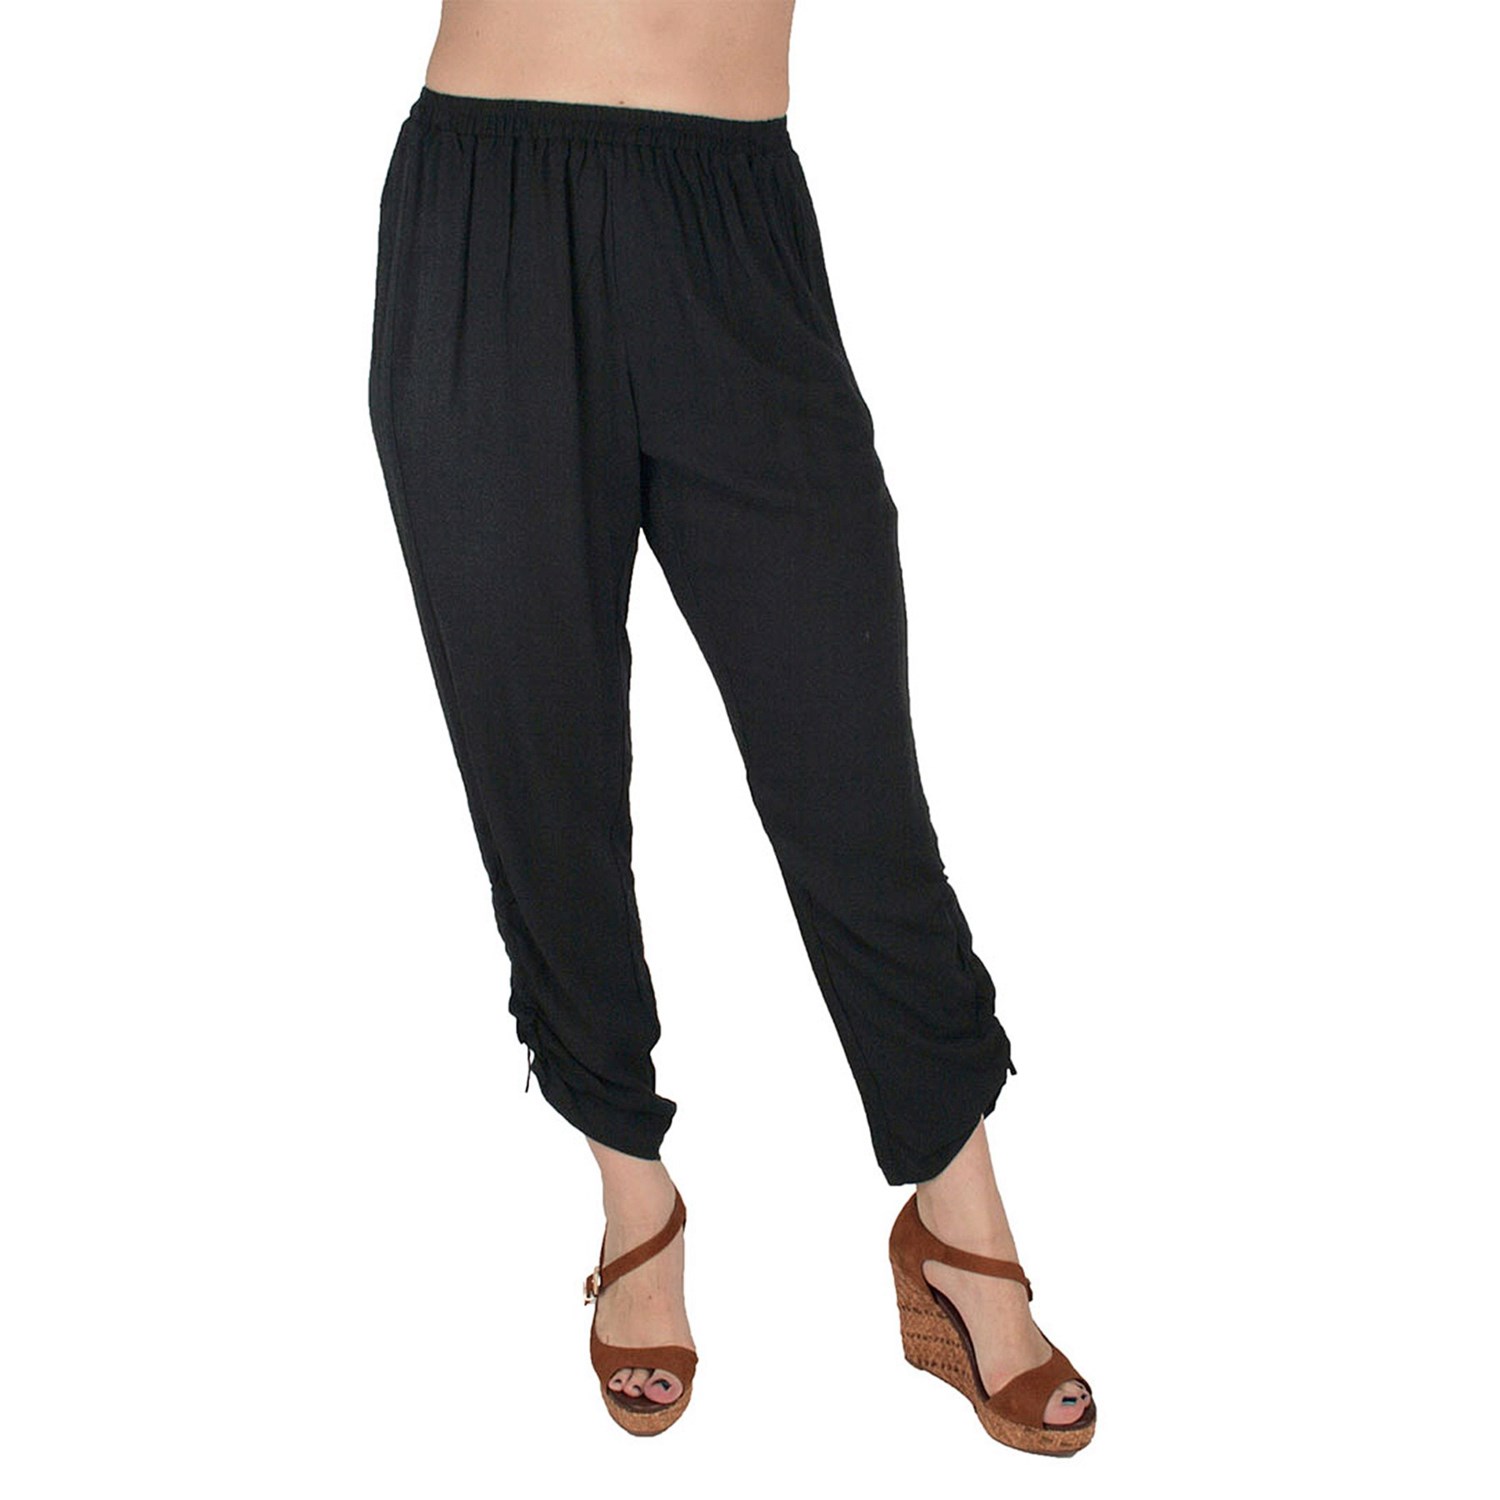 Ethyl Cotton Sheeting Pants (For Women) - Save 73%